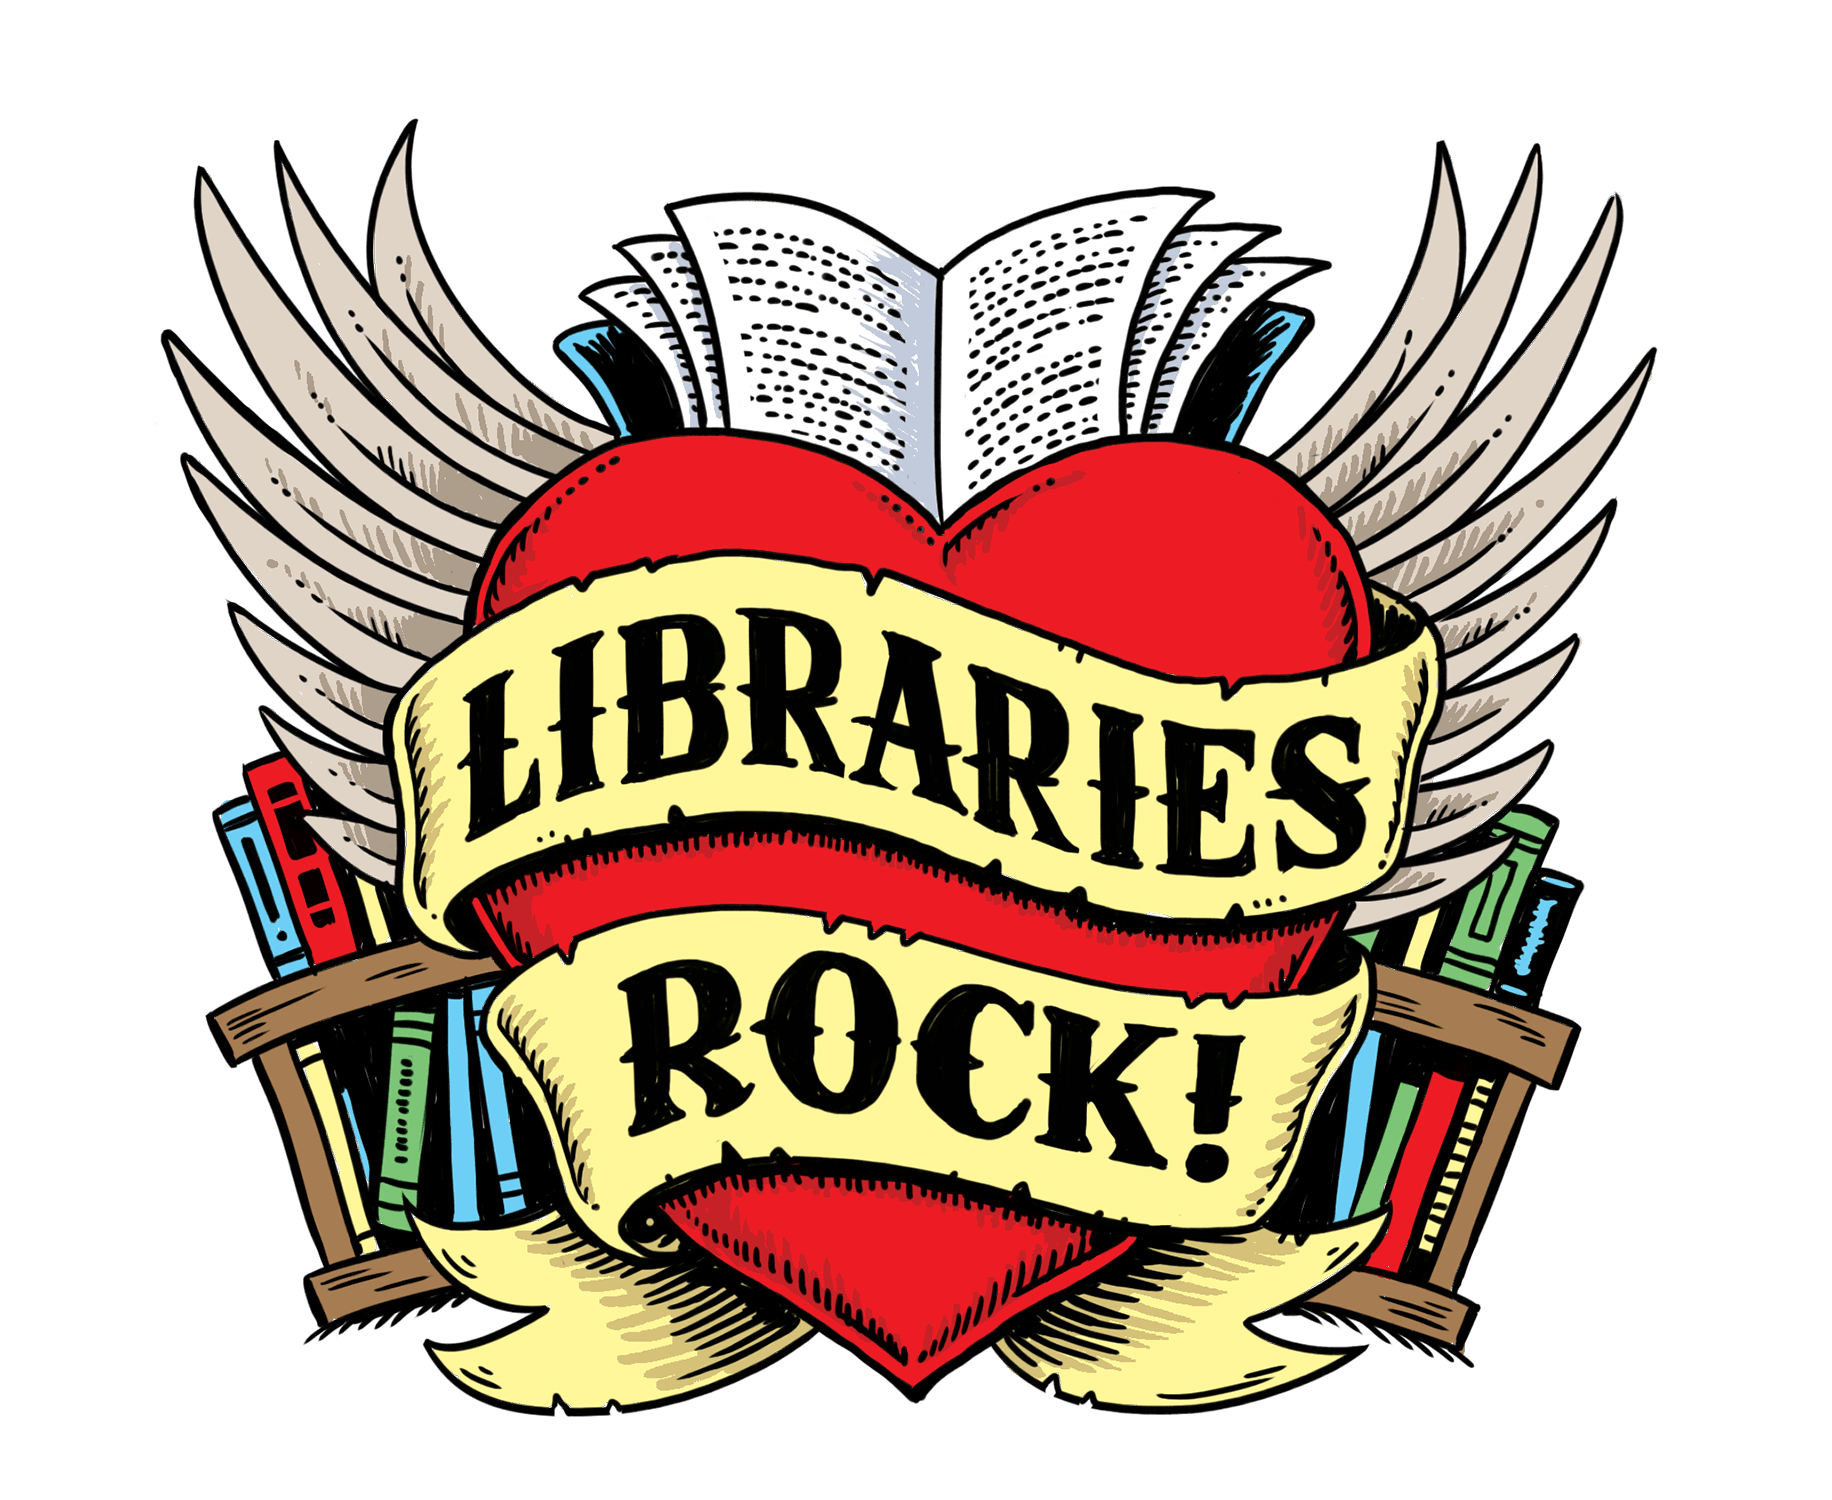 Kindness clipart summer friend. Learning lebanon county library